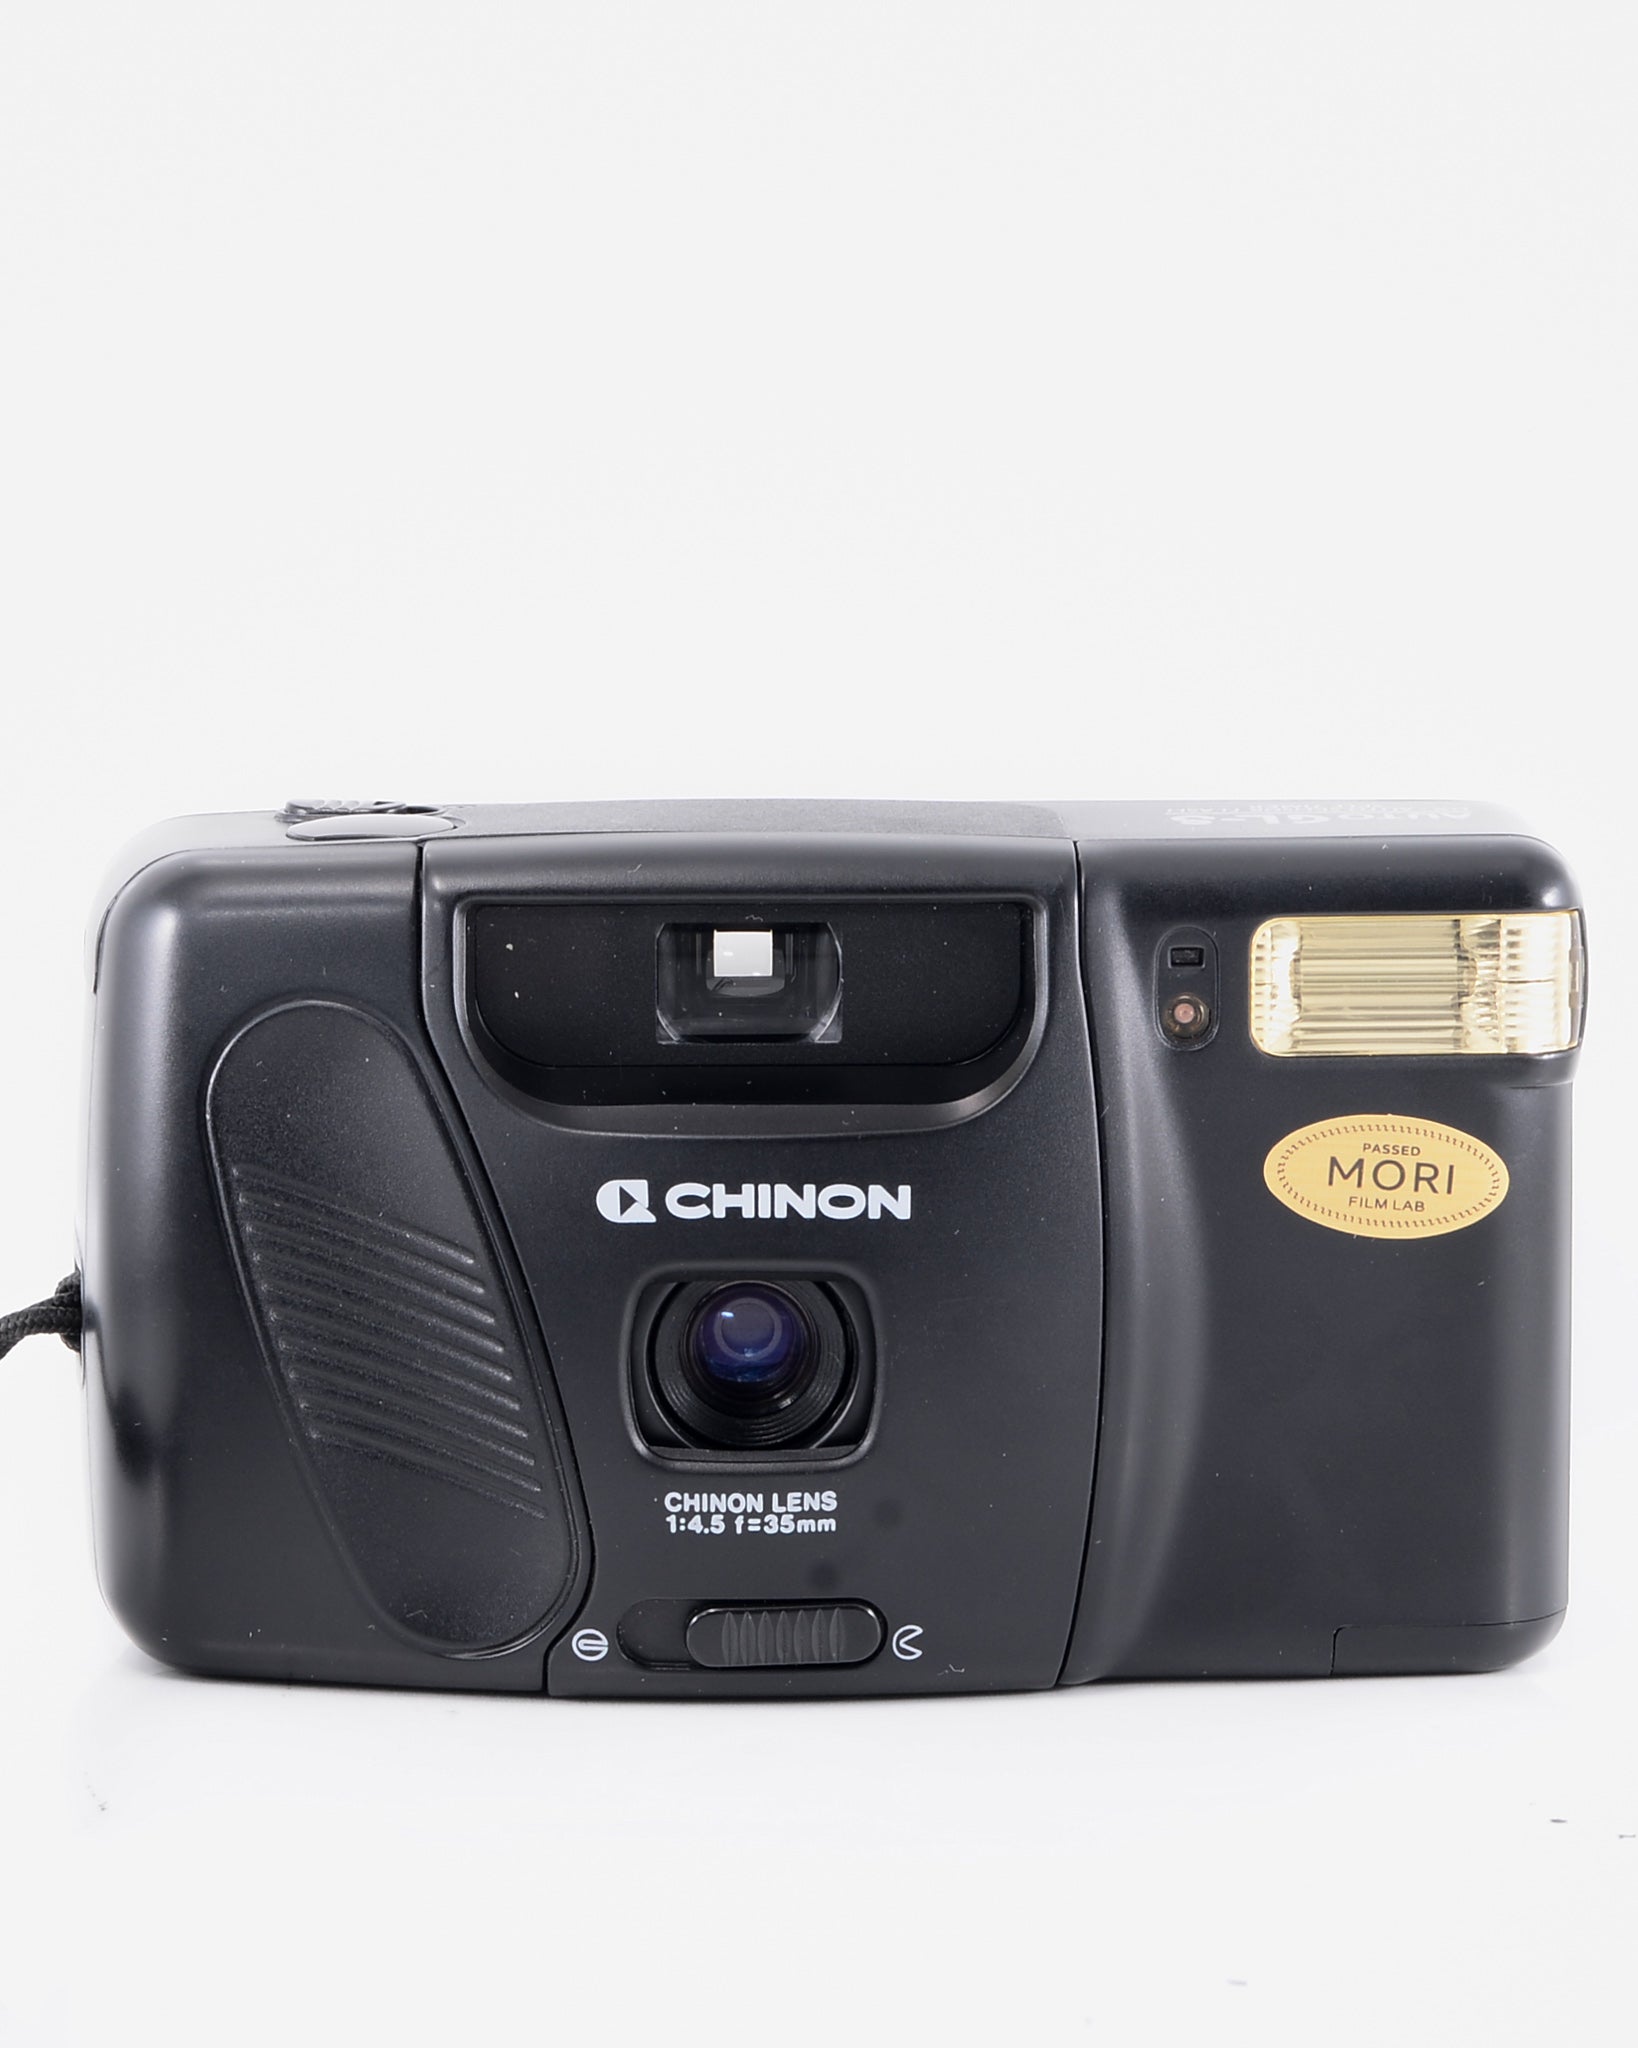 Chinon Auto GL-S 35mm point & shoot film camera with 35mm f4.5 lens